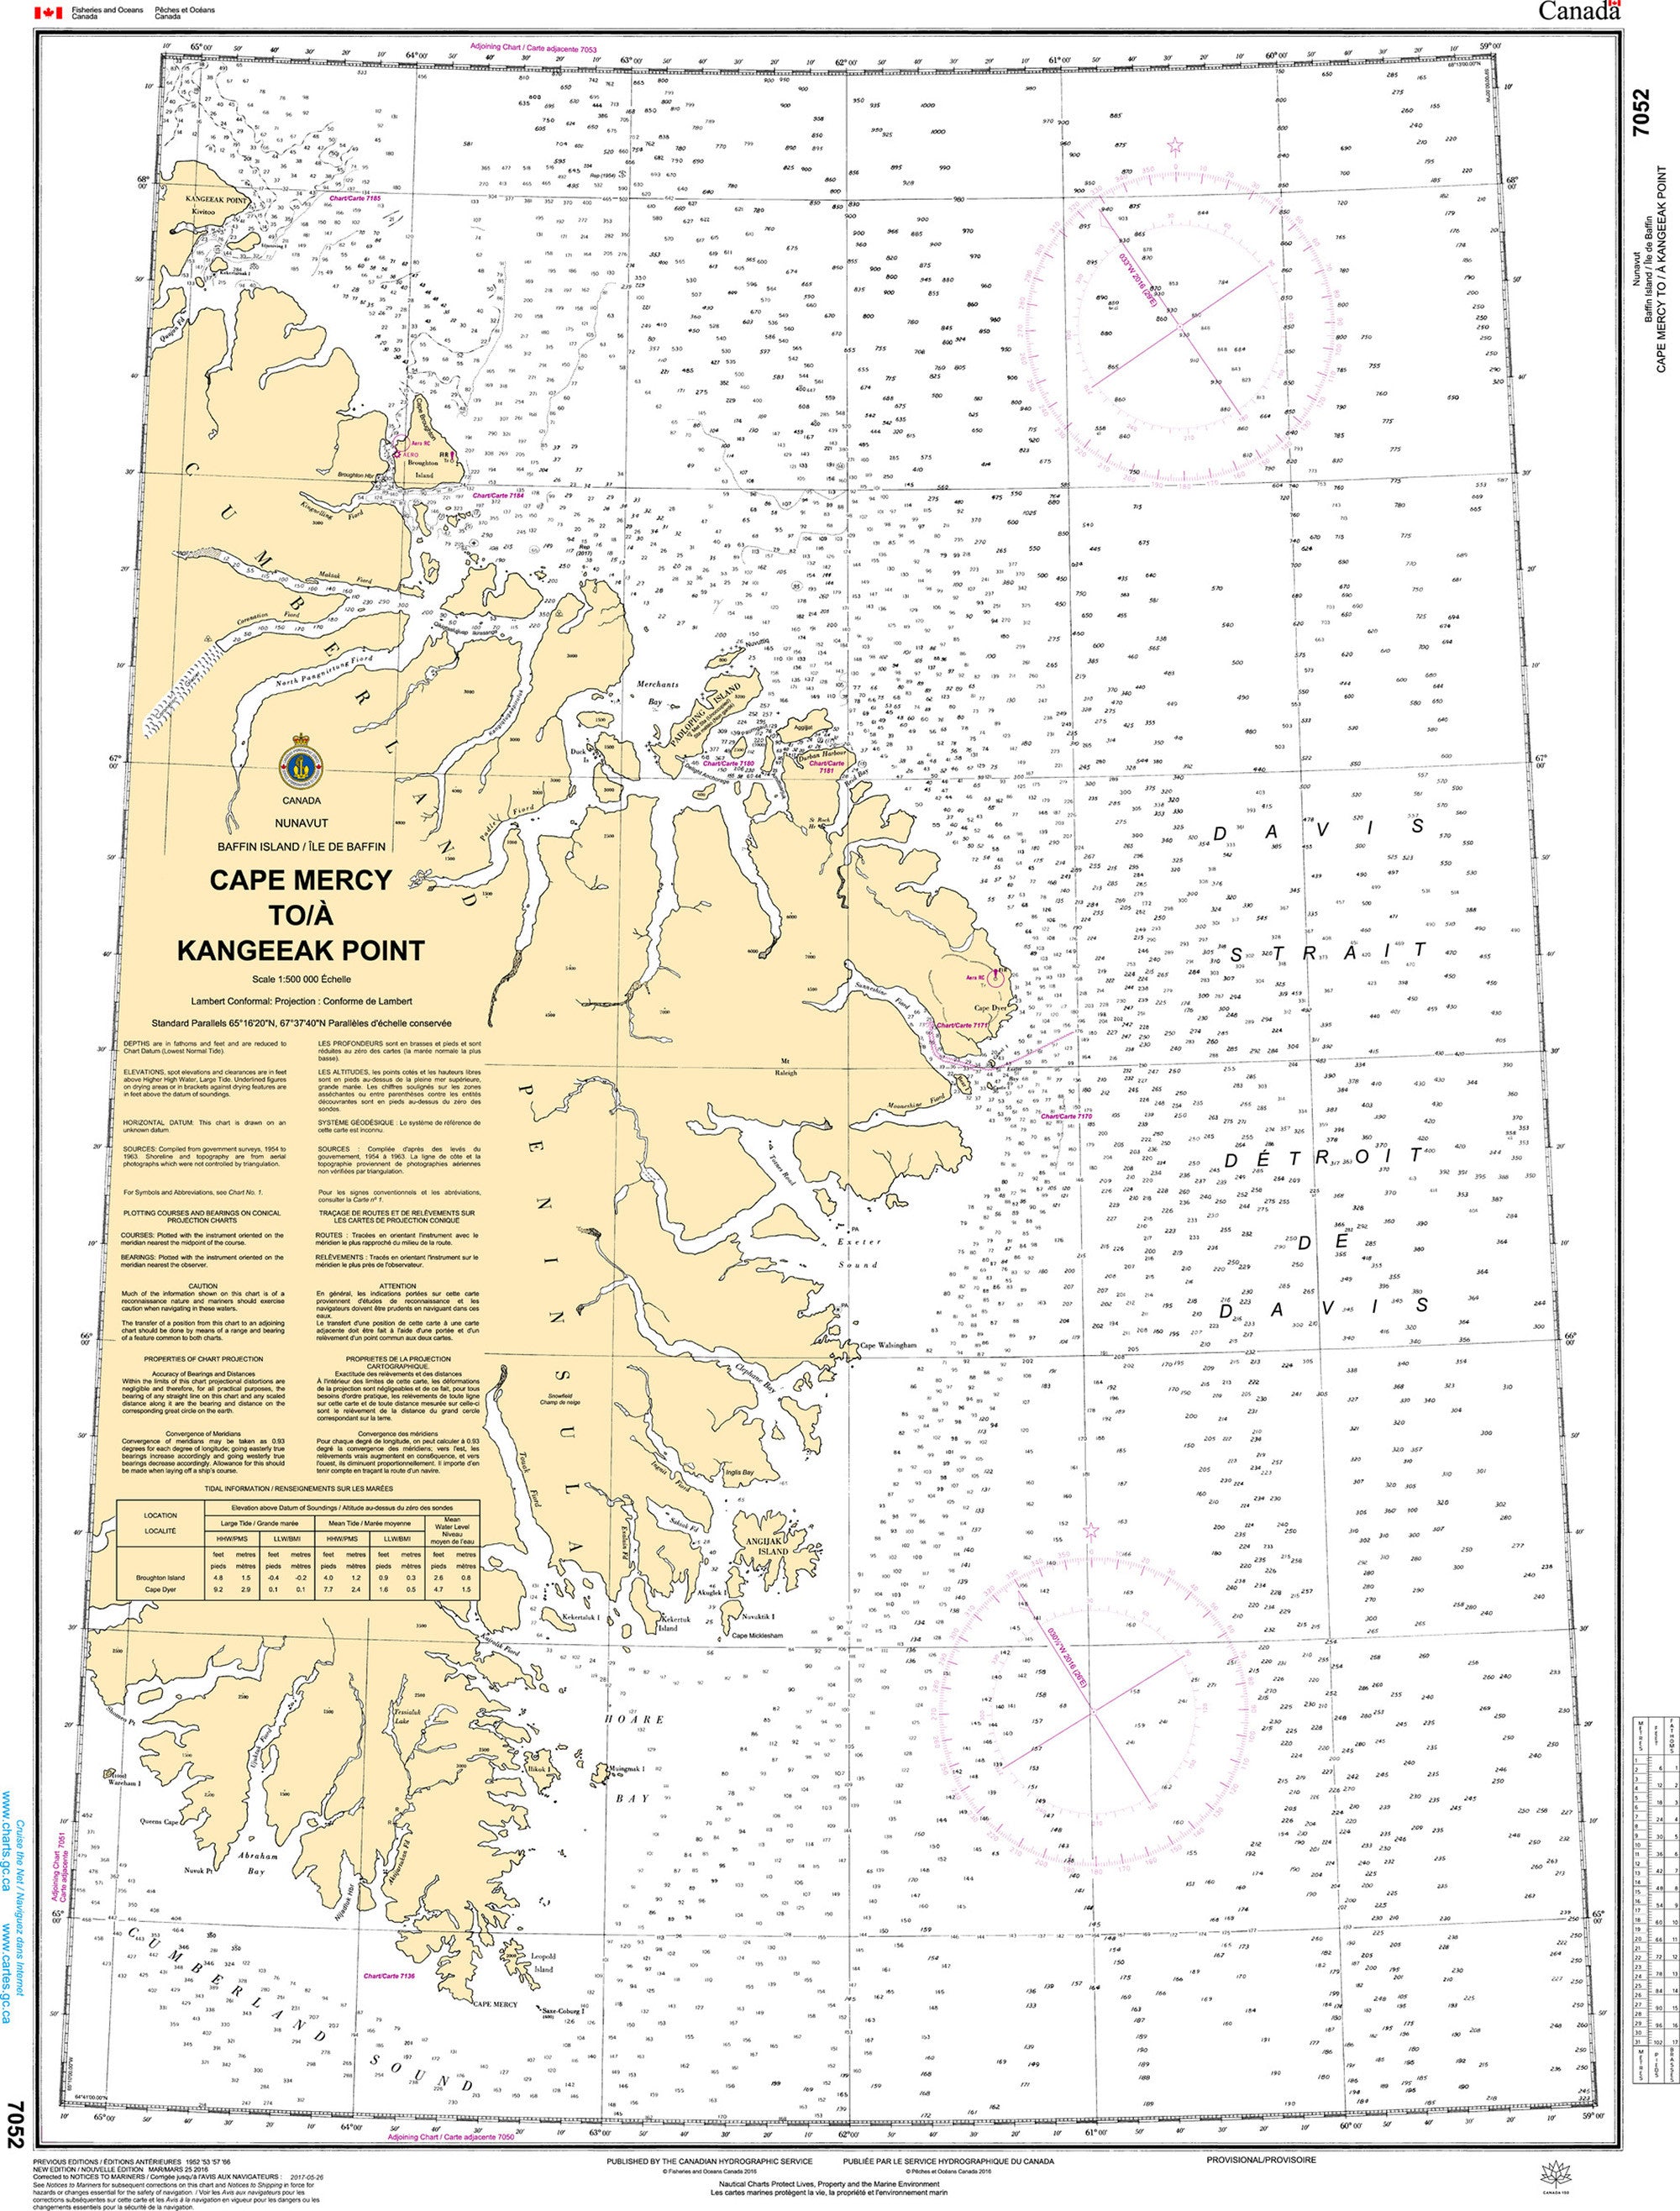 Canadian Hydrographic Service Nautical Chart CHS7052: Cape Mercy to Kangeeak Point